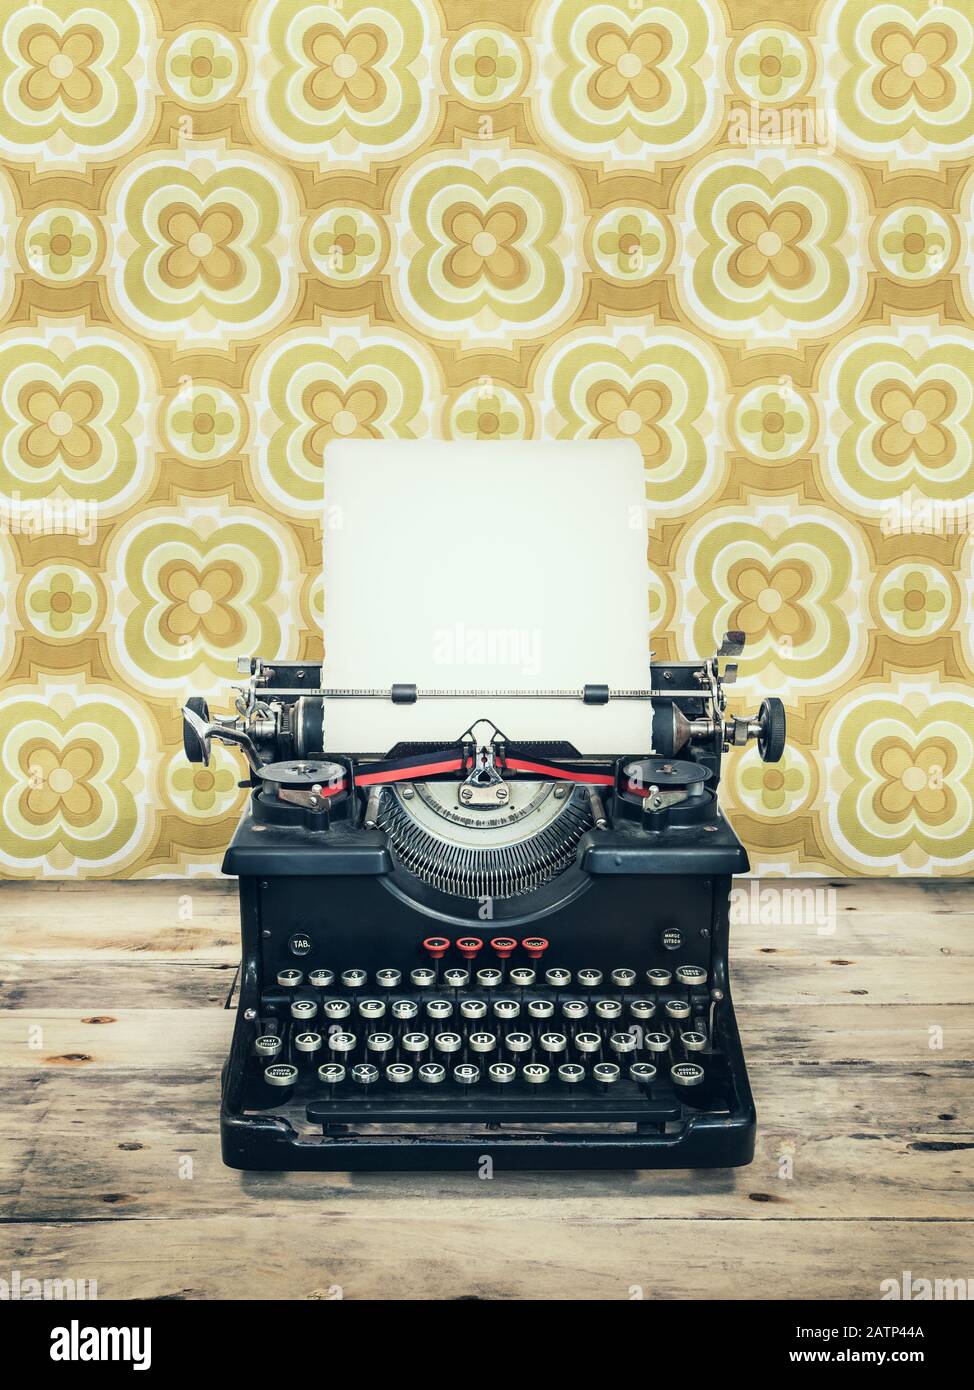 Retro styled image of an old typewriter on a wooden floor with vintage wallpaper behind it Stock Photo